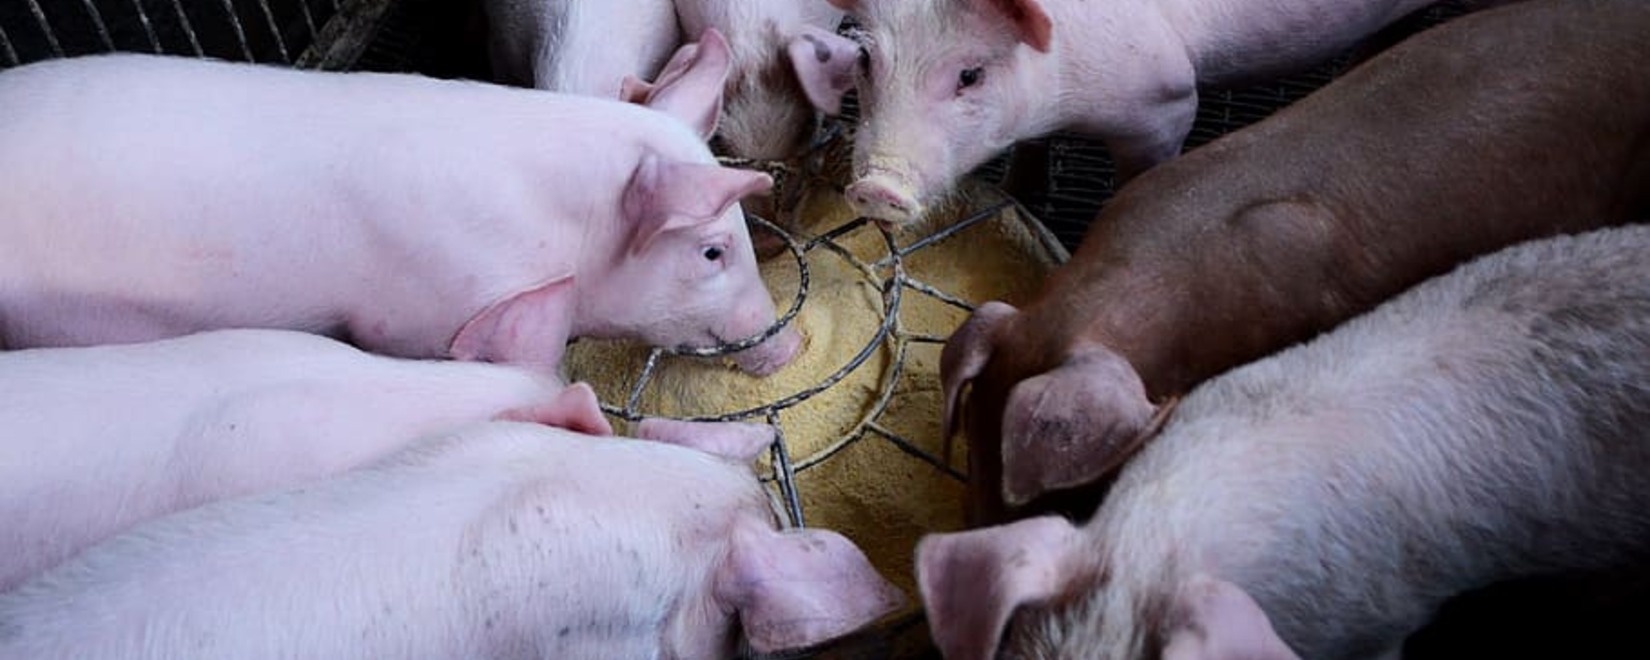 Three Russian companies have received permission to export pork to China, with deliveries starting in March.